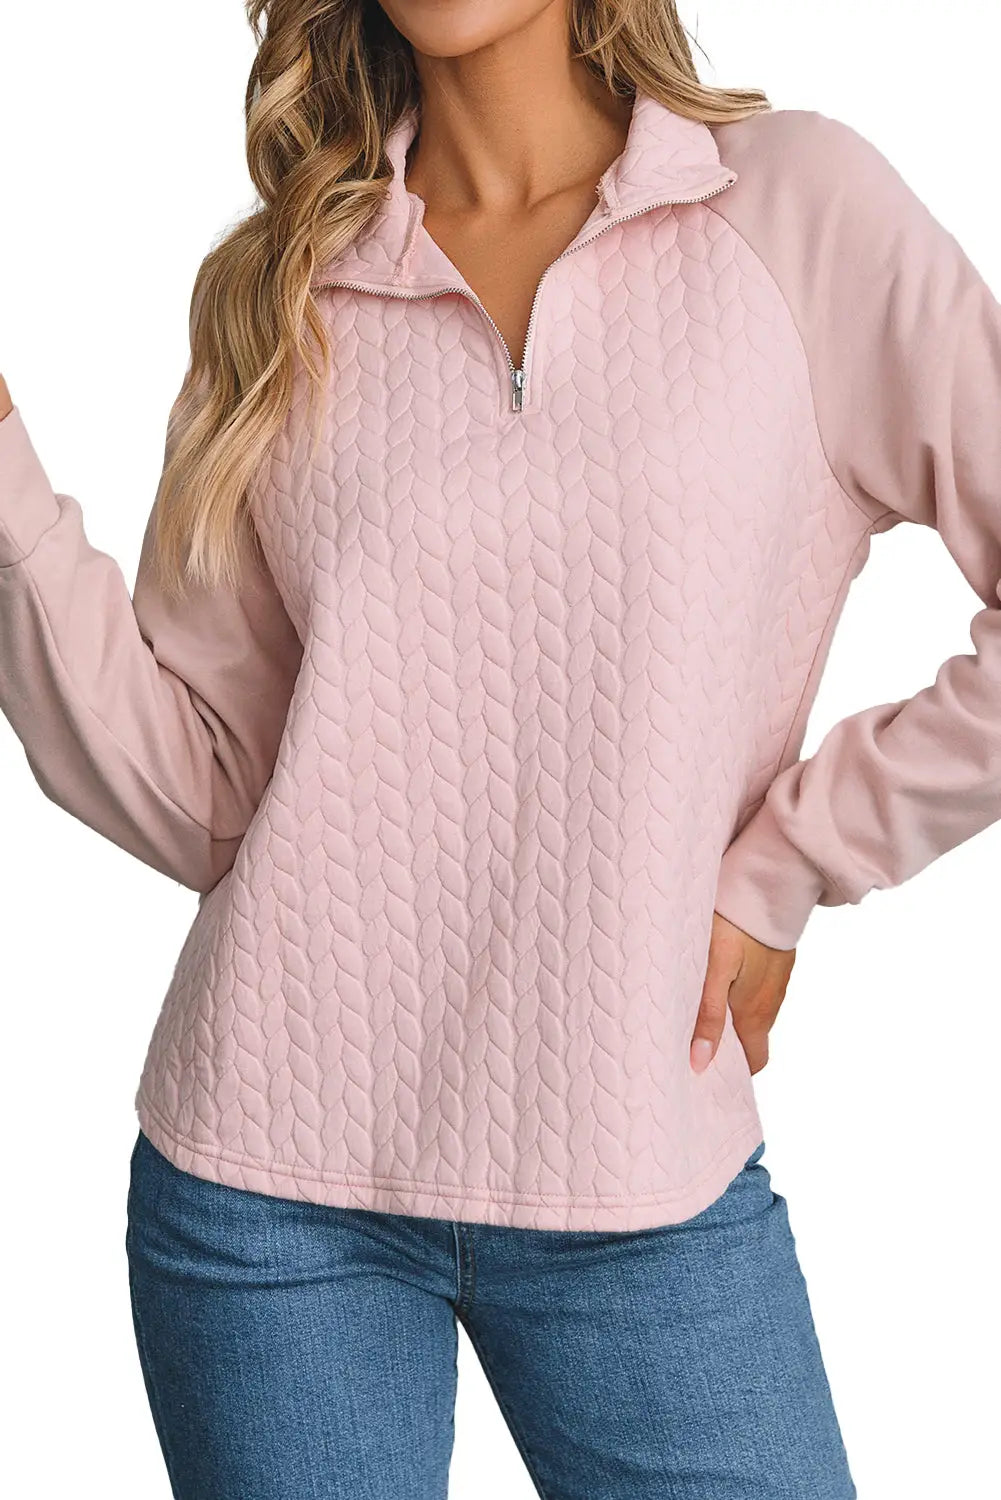 Pale chestnut side buttons cable textured sweatshirt - sweatshirts & hoodies